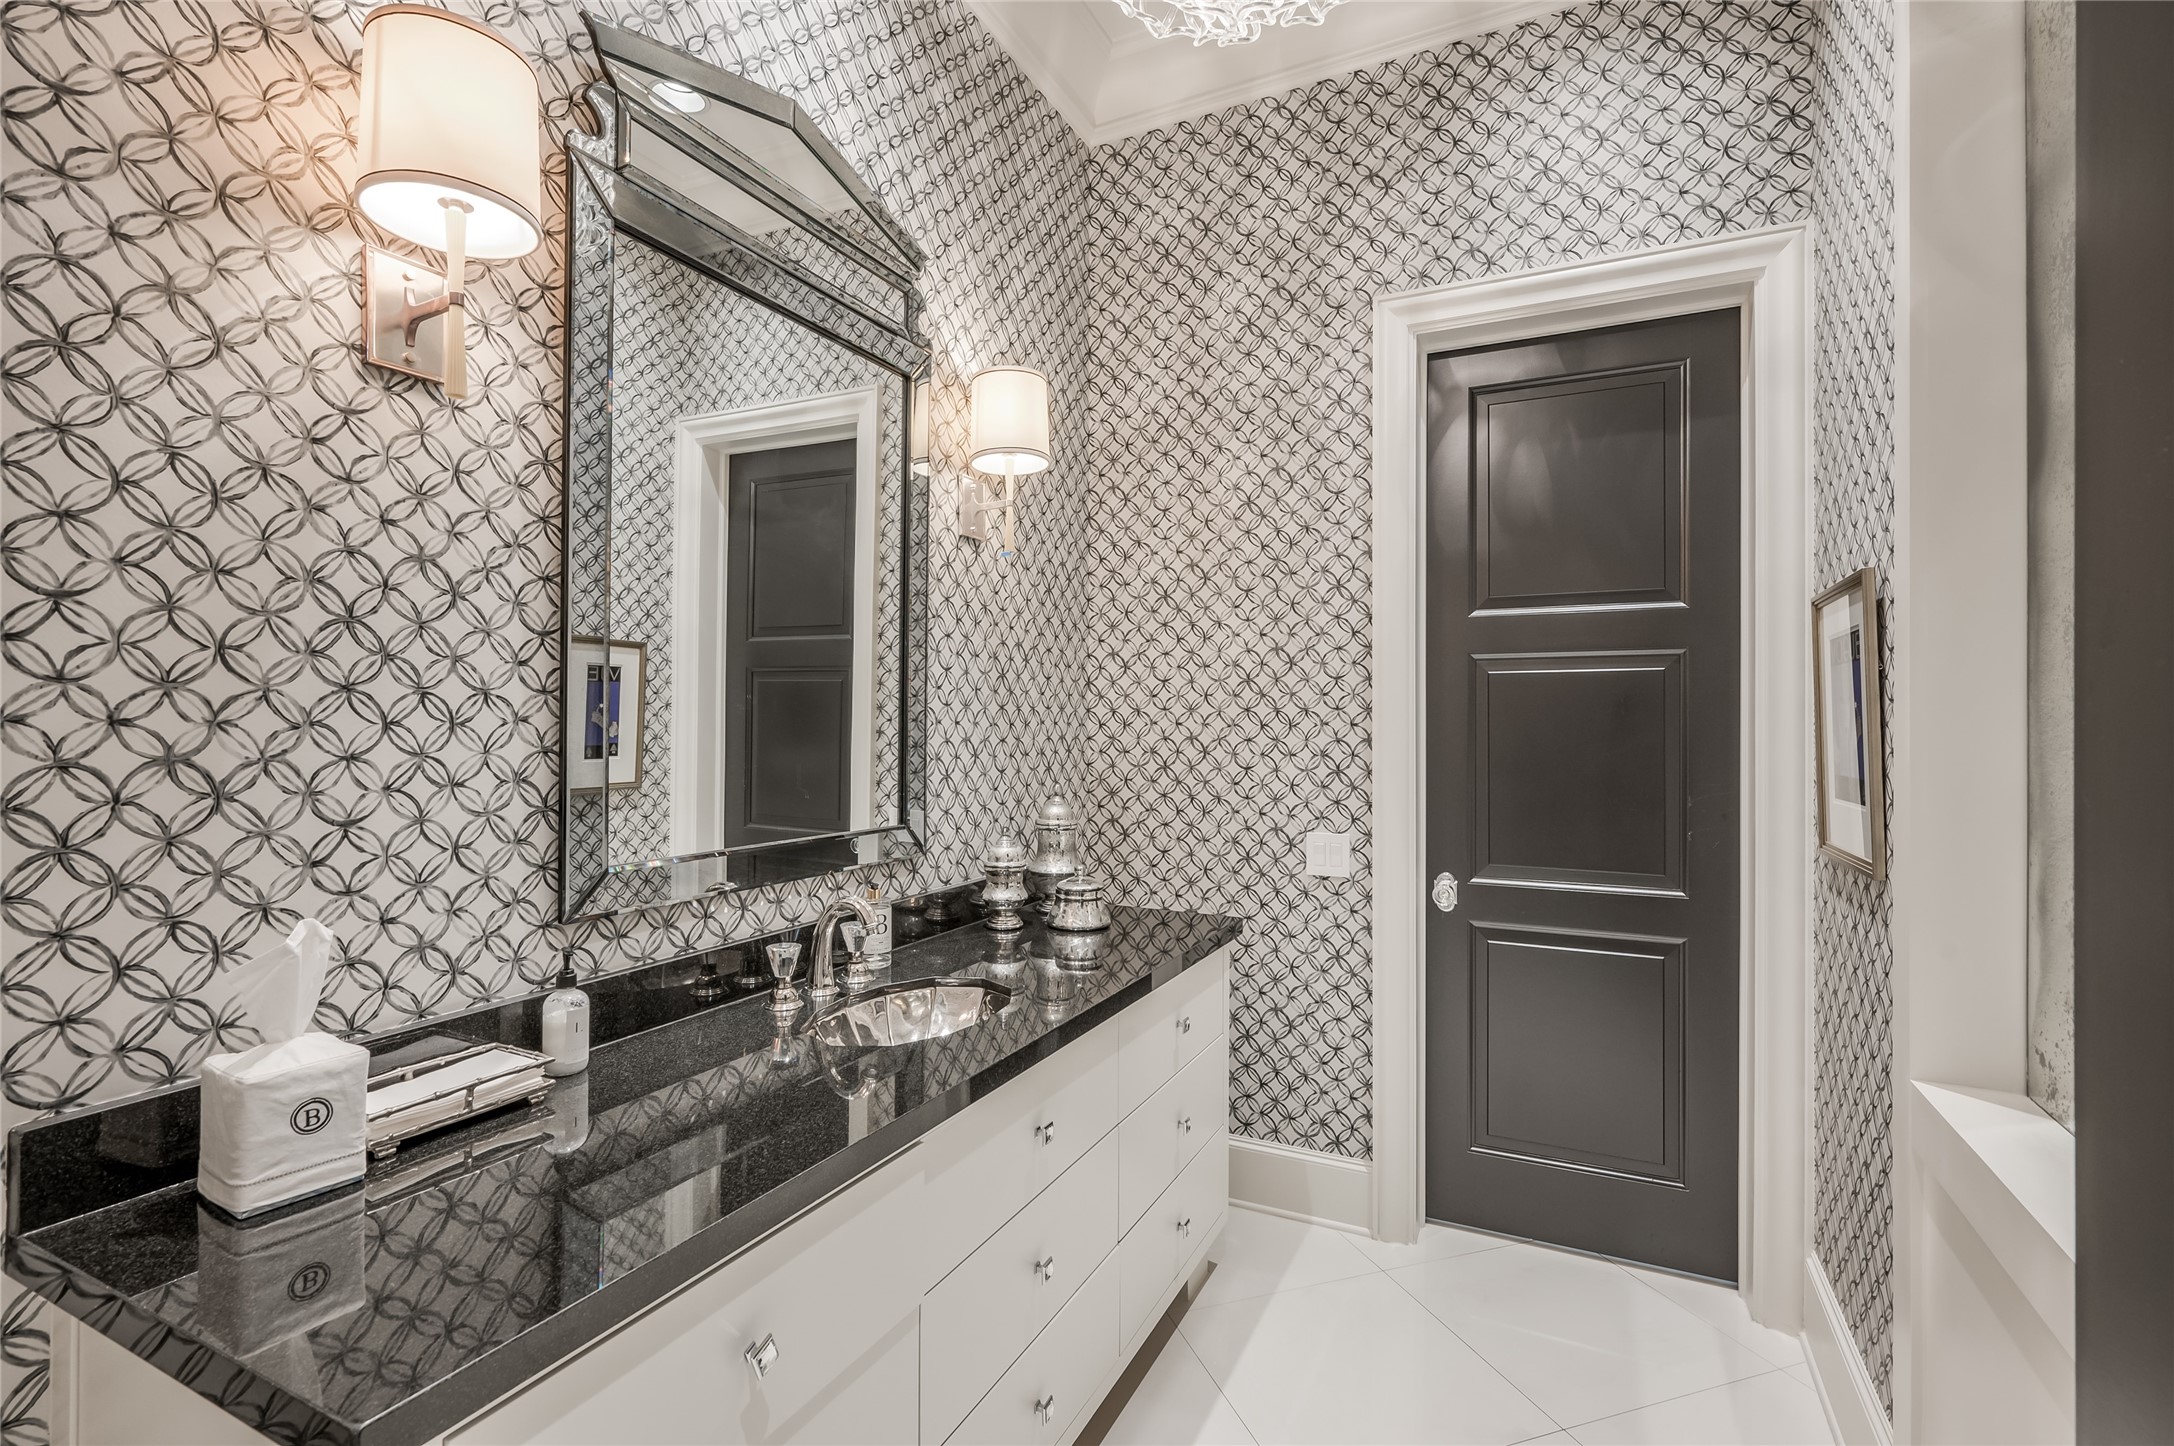 [Formal Powder Room]
Located in the cross gallery near the study, the formal powder room features designer wallpaper, a marble floor, granite sink deck, and a verre eglomise wall mirror (right).